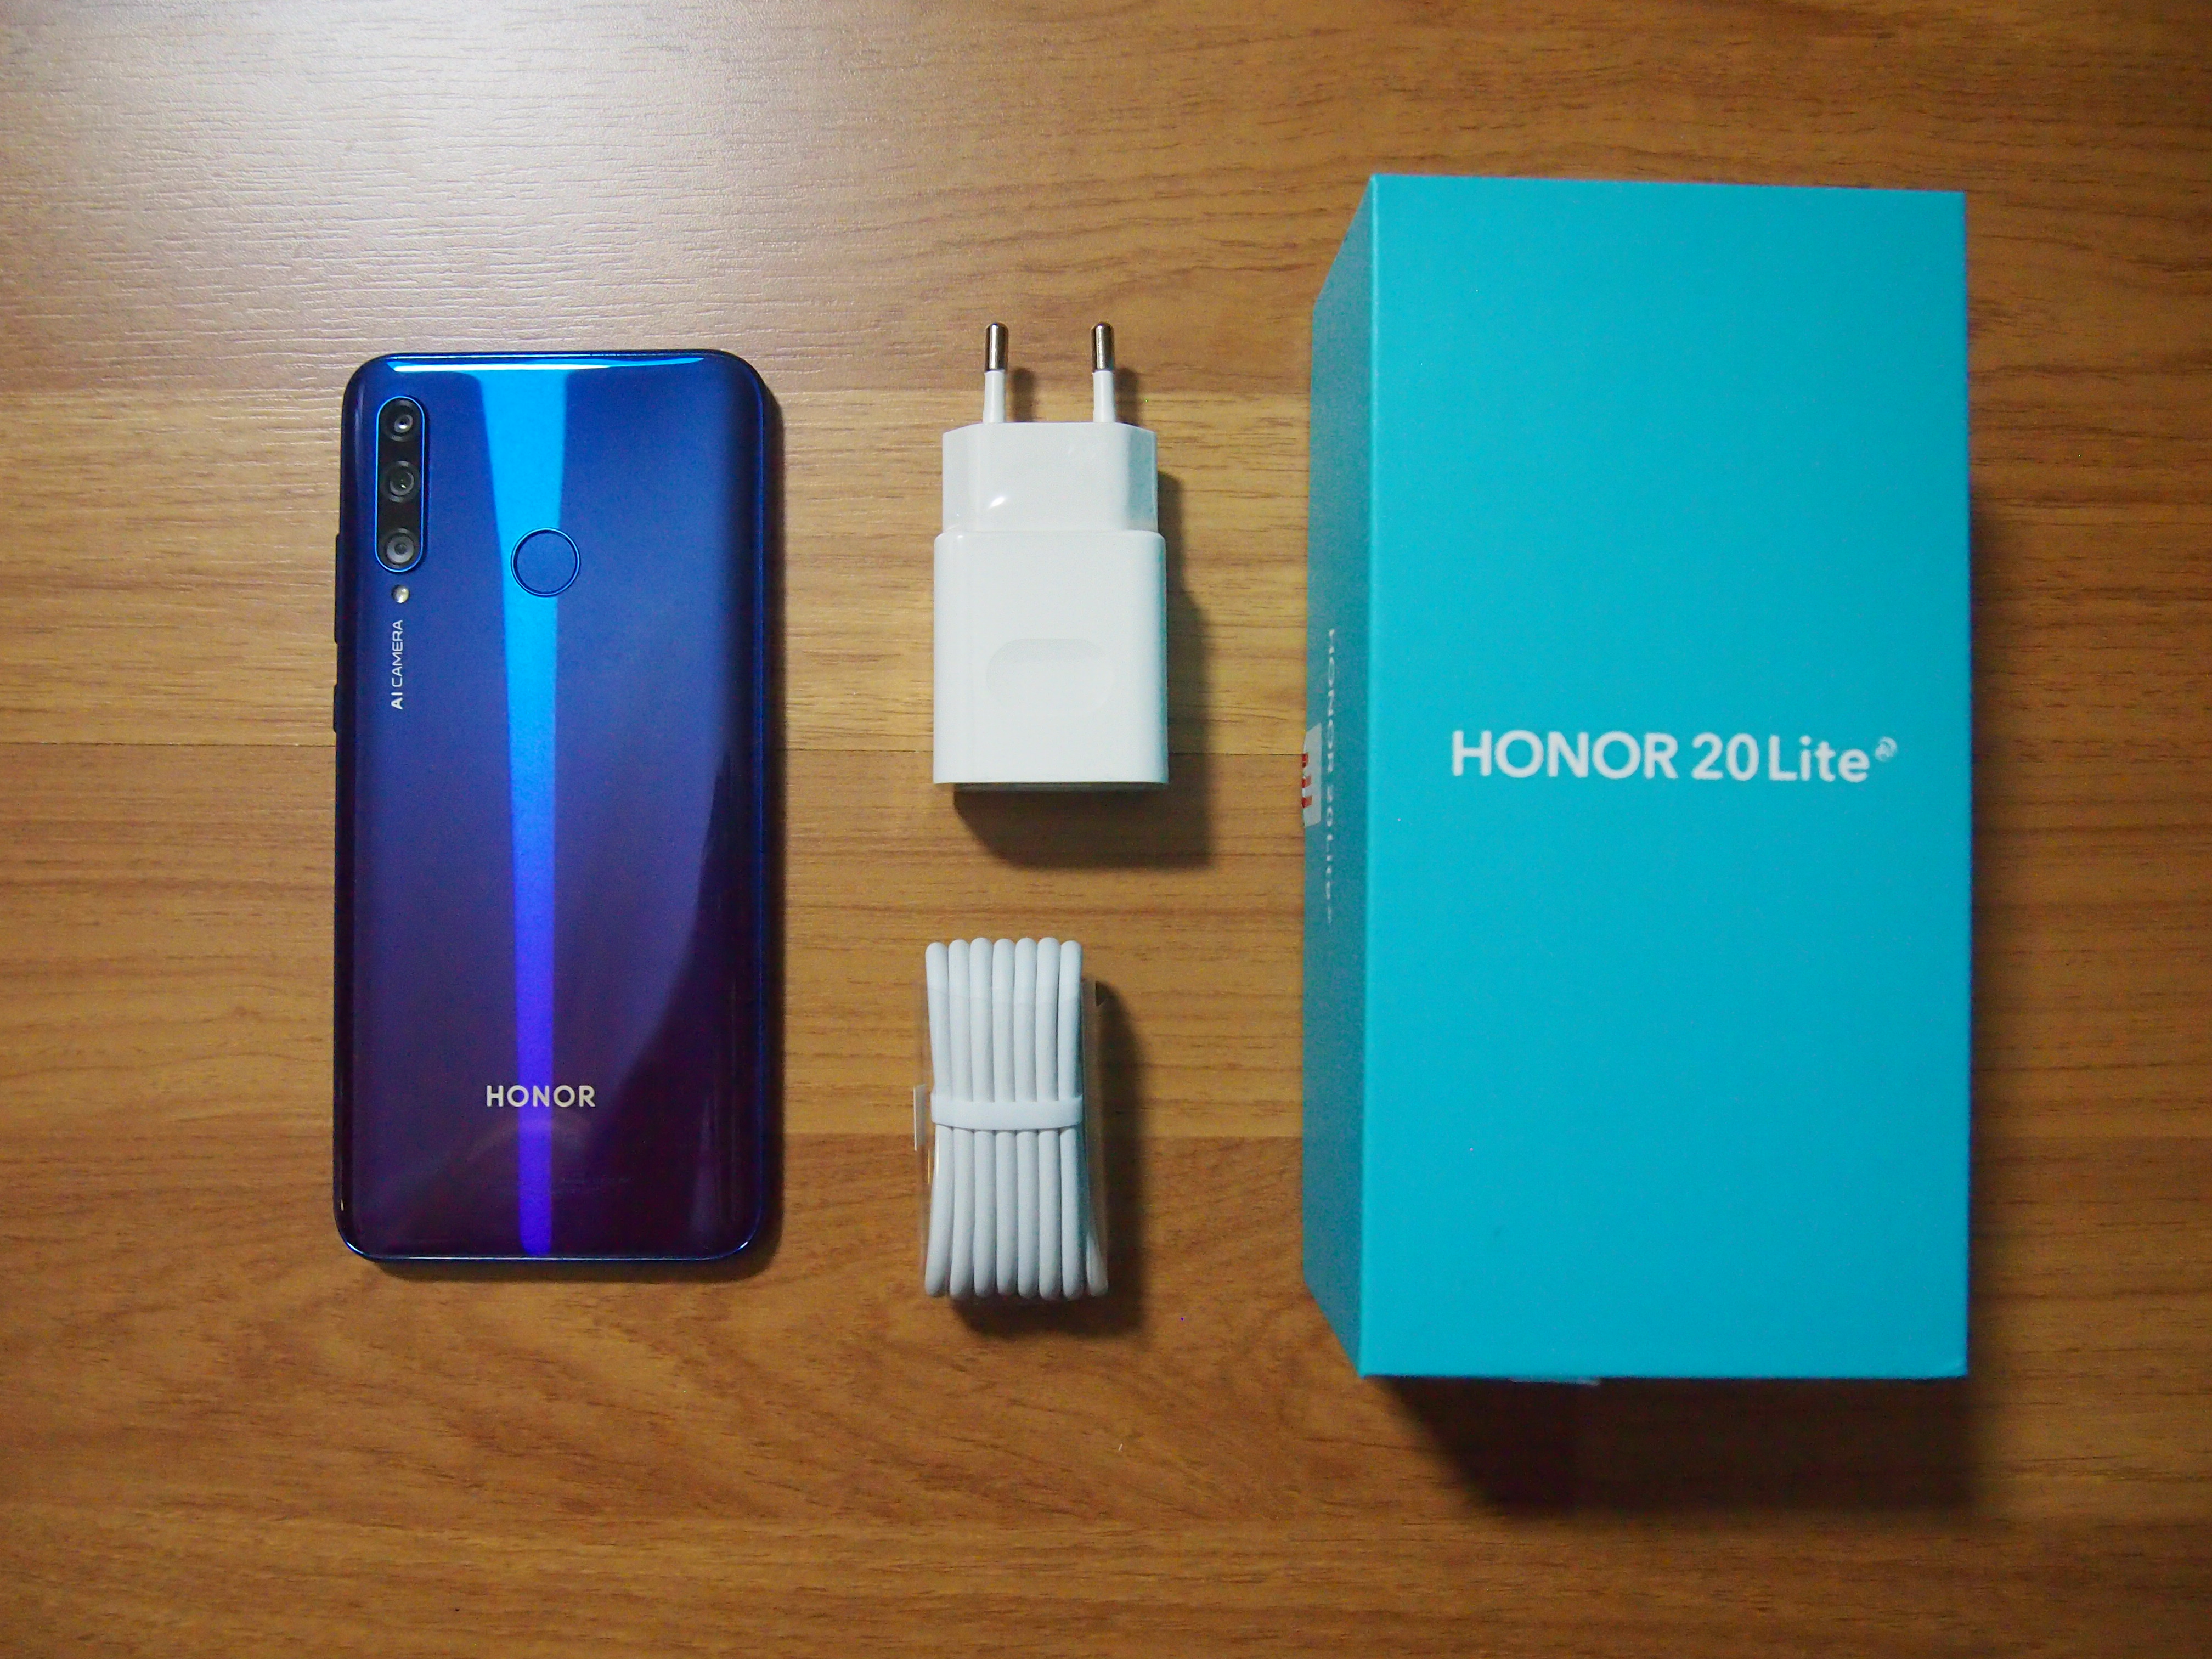 Honor Pad X9 Unboxing, Price in UK, Hands on Review